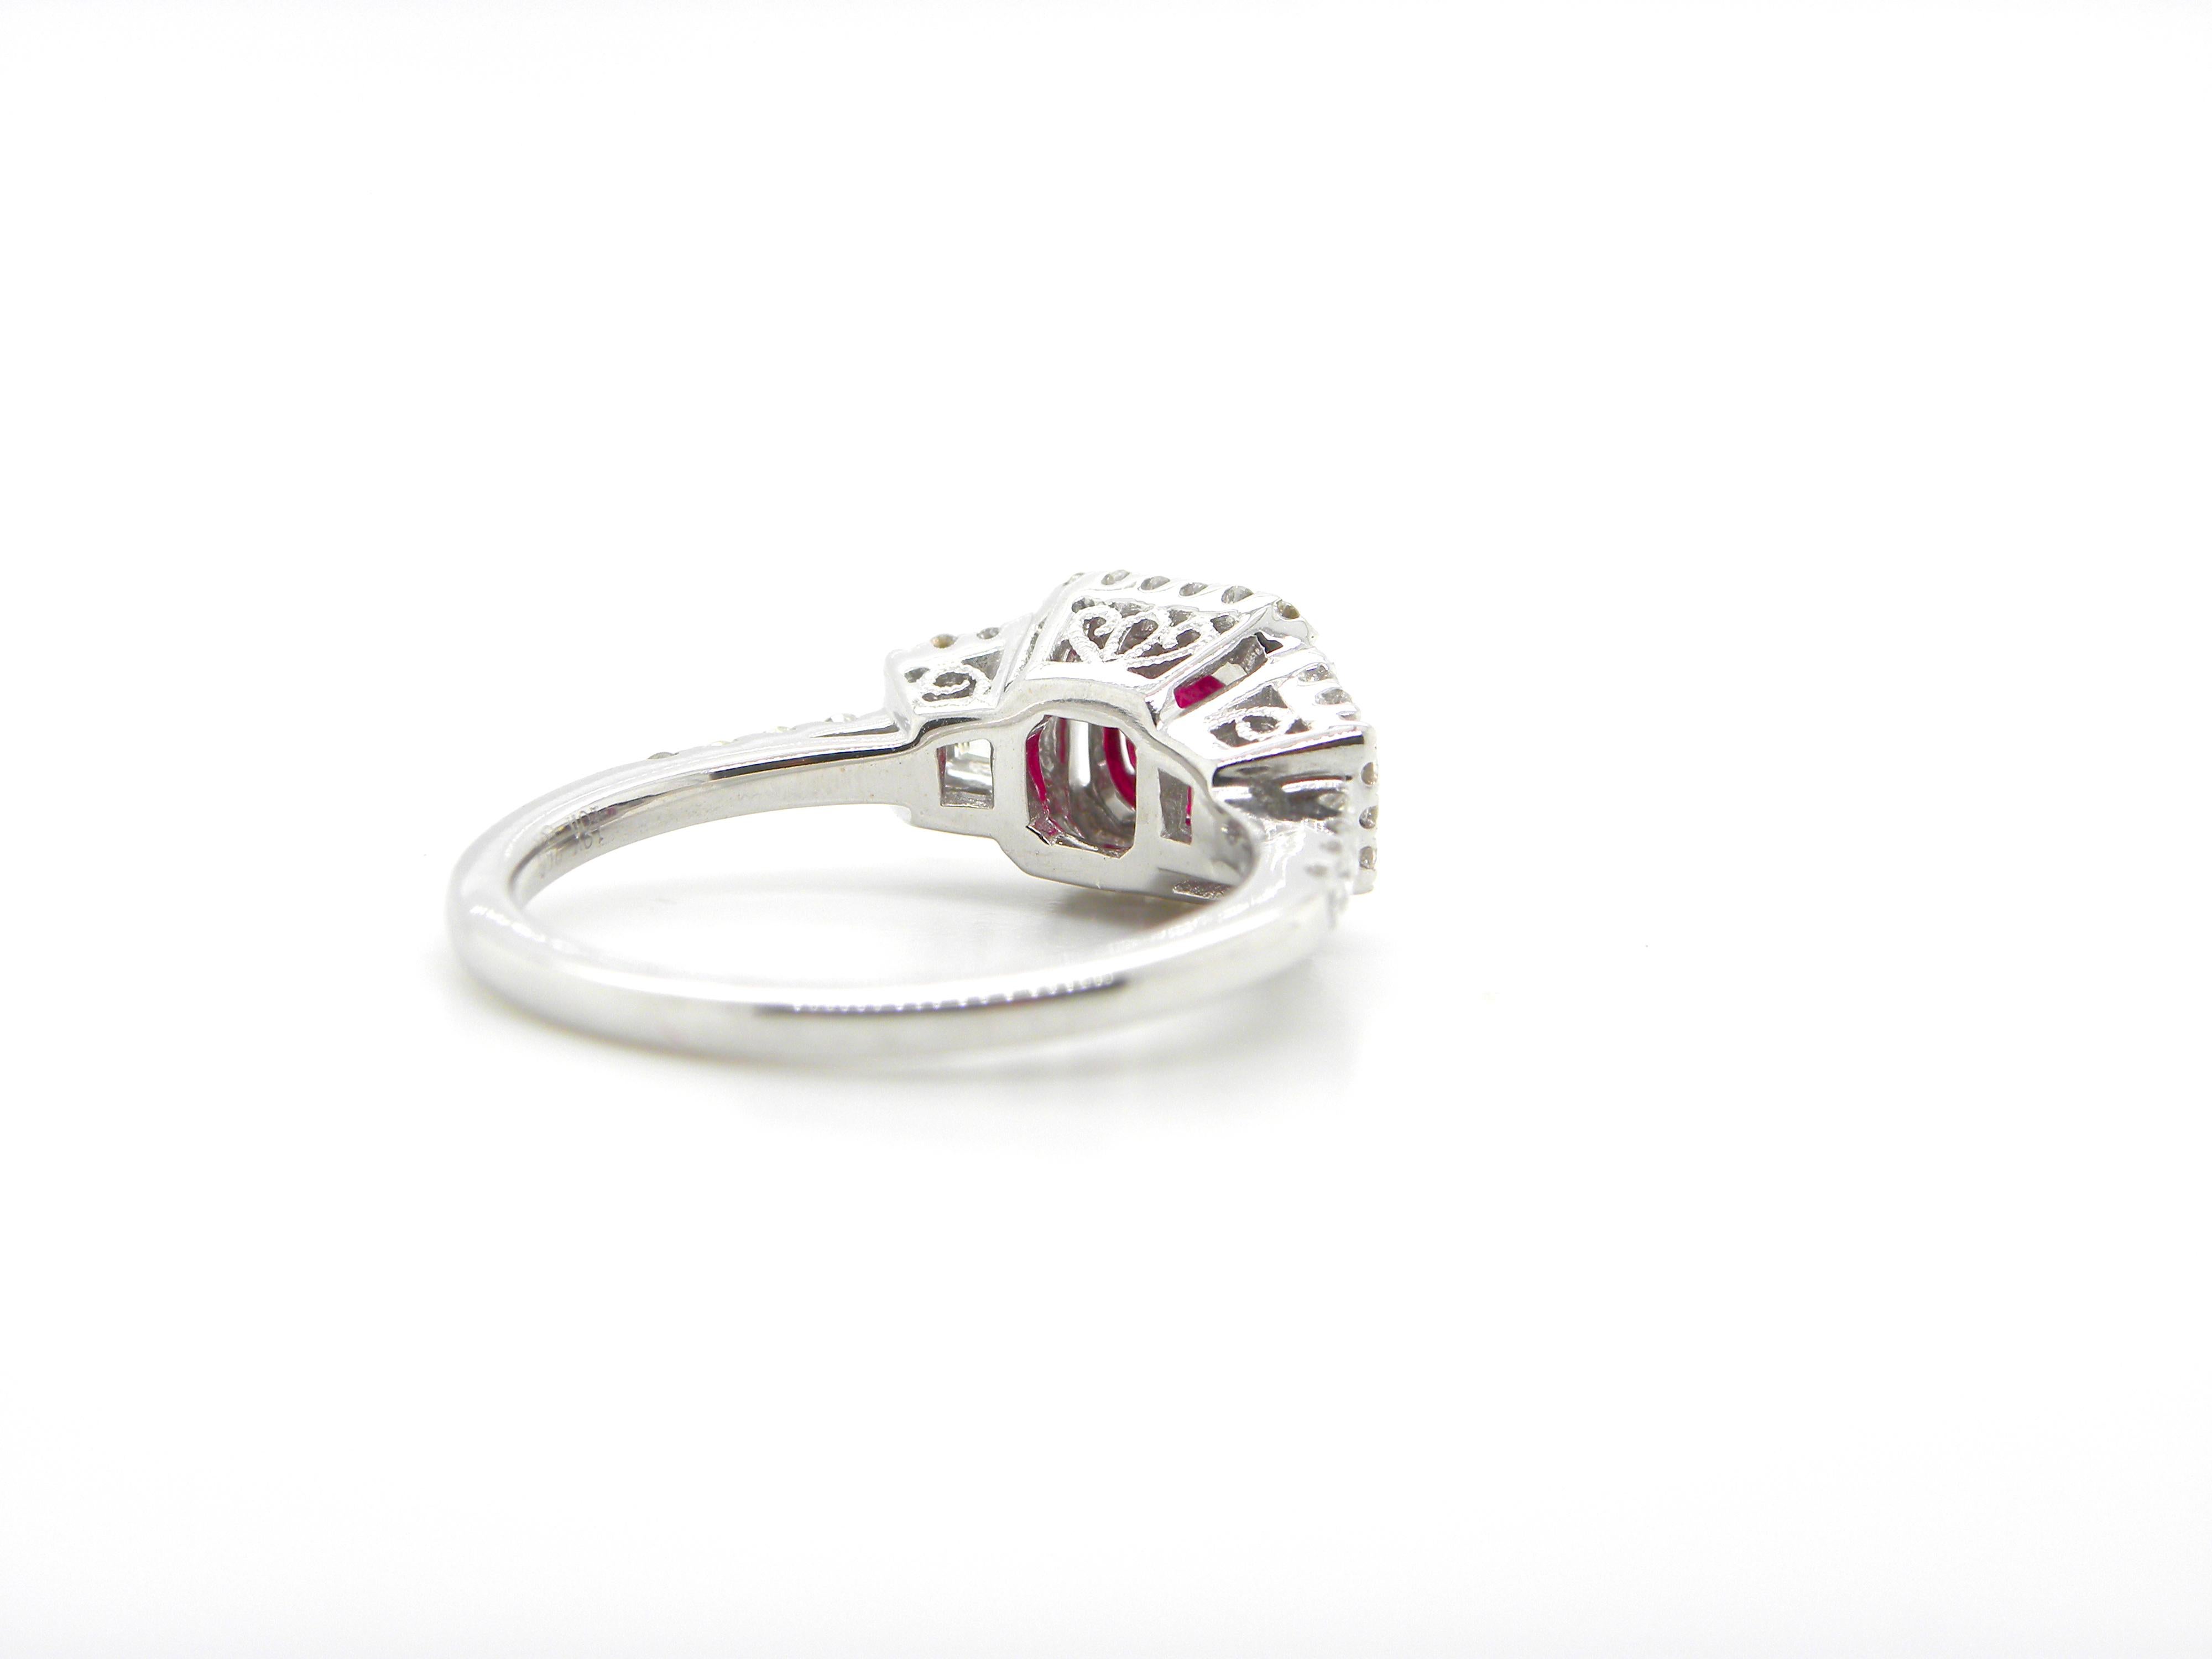 Women's or Men's 1.12 Carat GIA Certified Unheated Vivid Red Burmese Ruby and Diamond Gold Ring